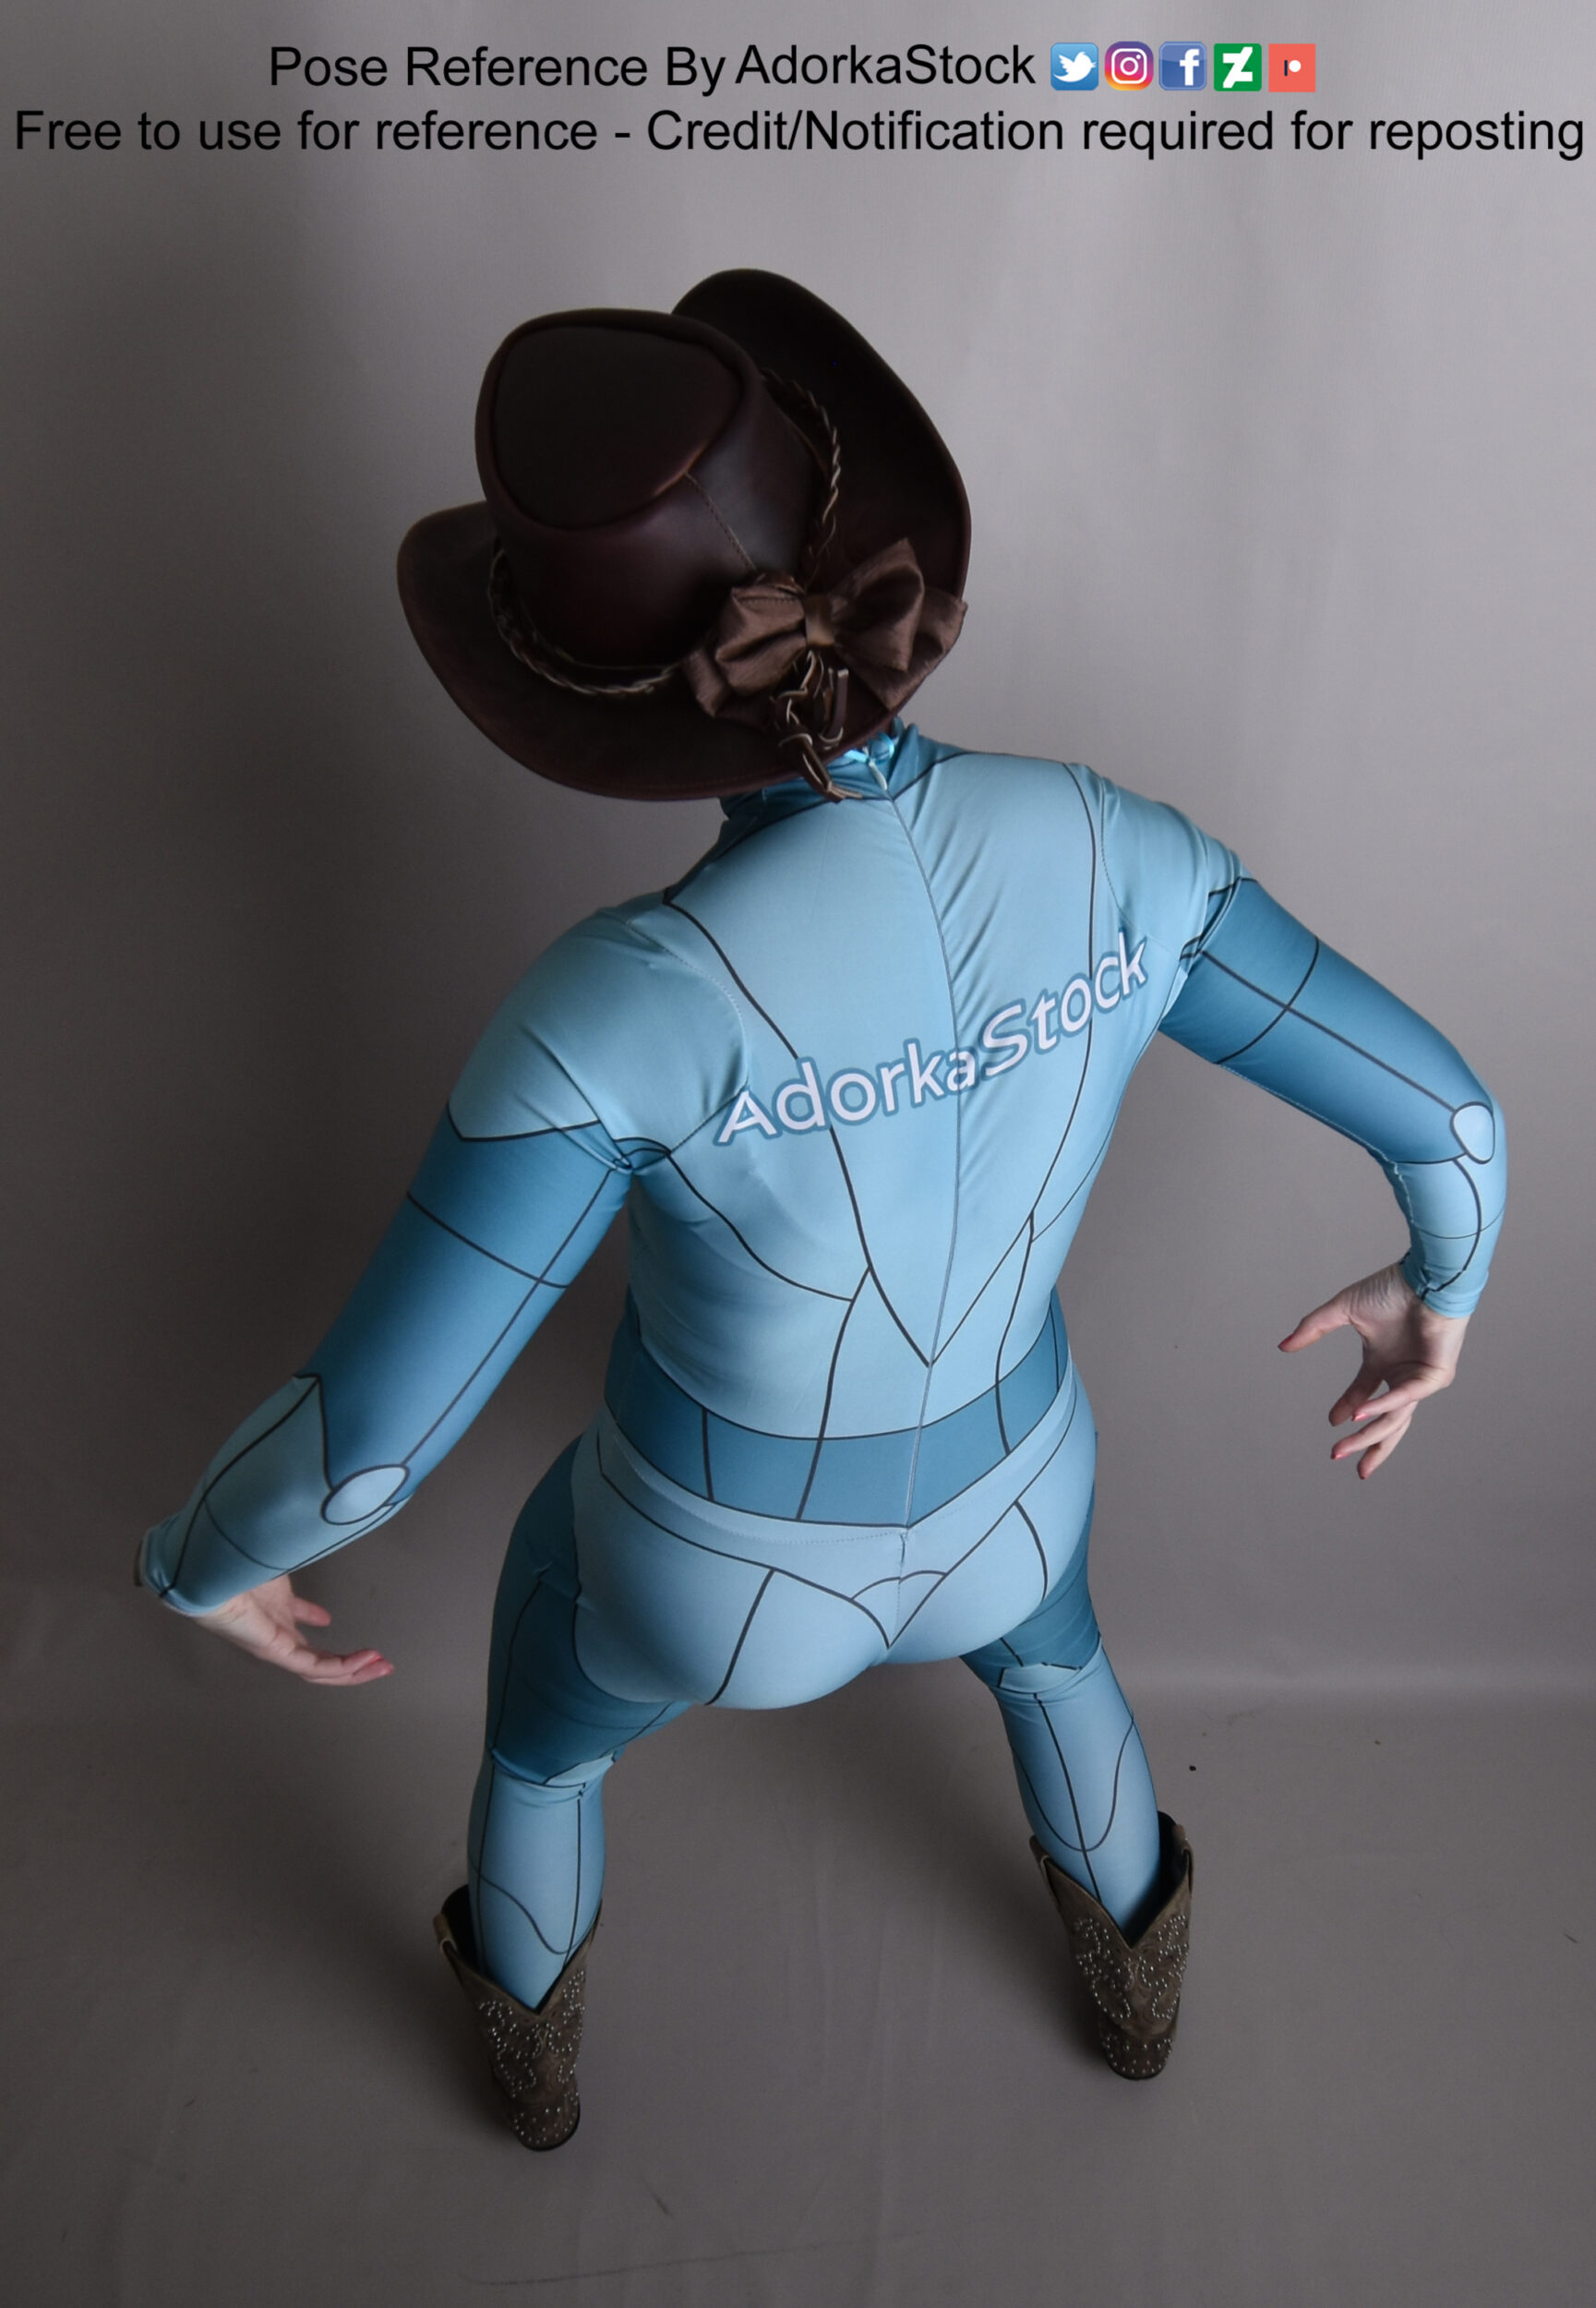 We dual at dawn – high perspective back pose reference with grid suit and cowboy hat